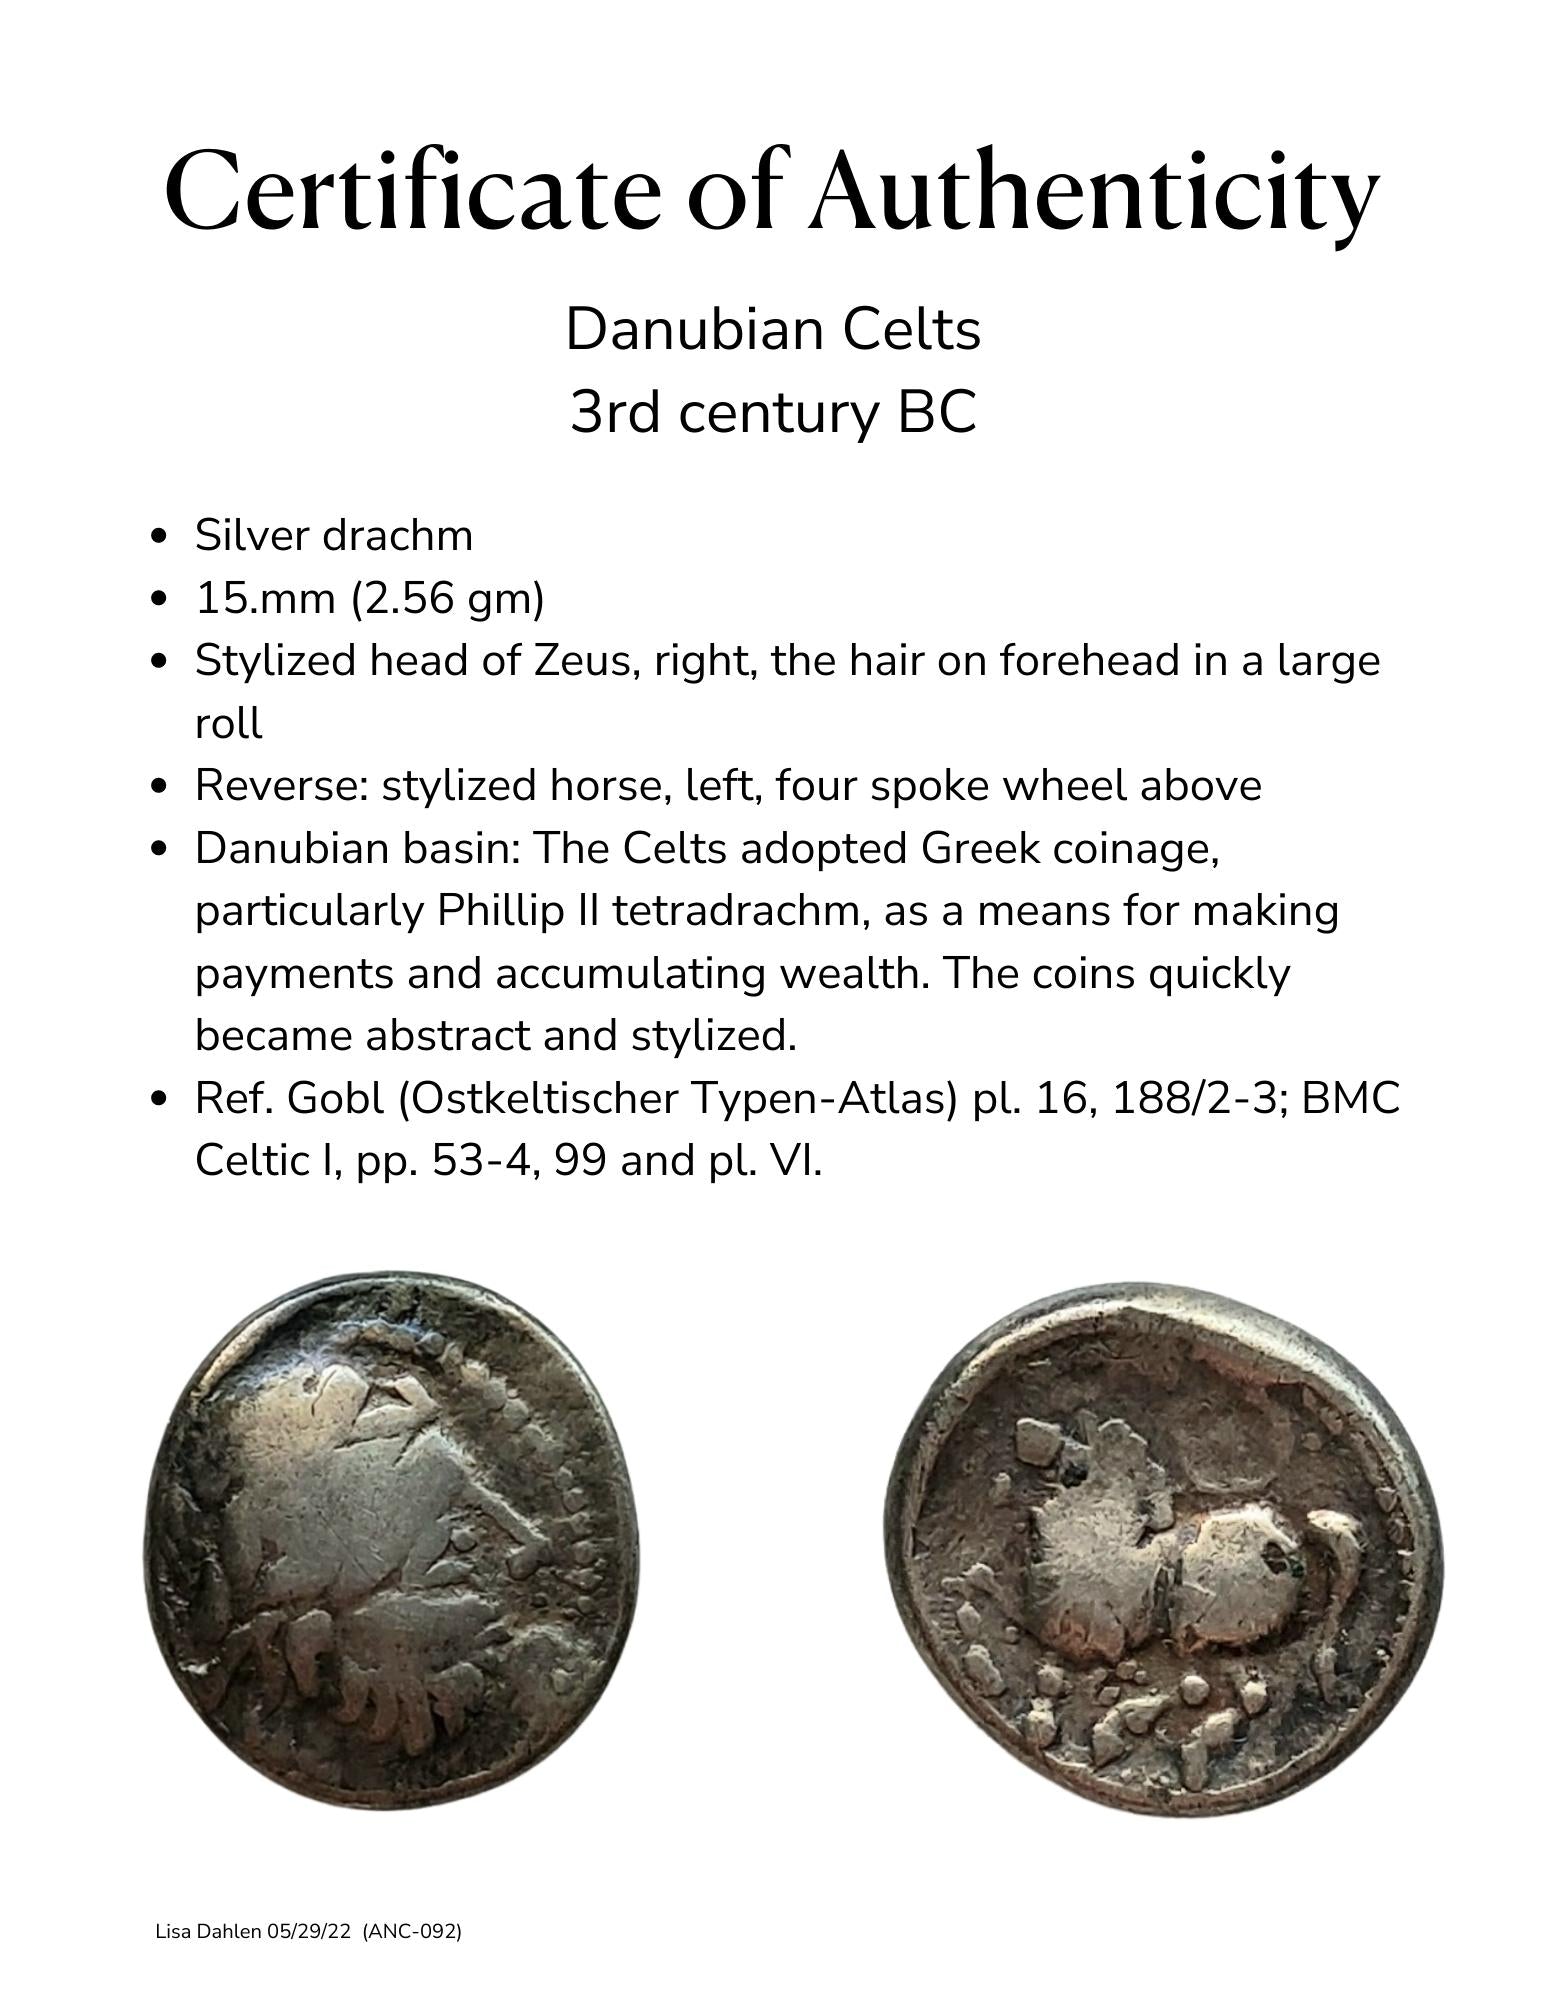 Ancient celtic silver coin of a stylized horse and zeus, certificate.